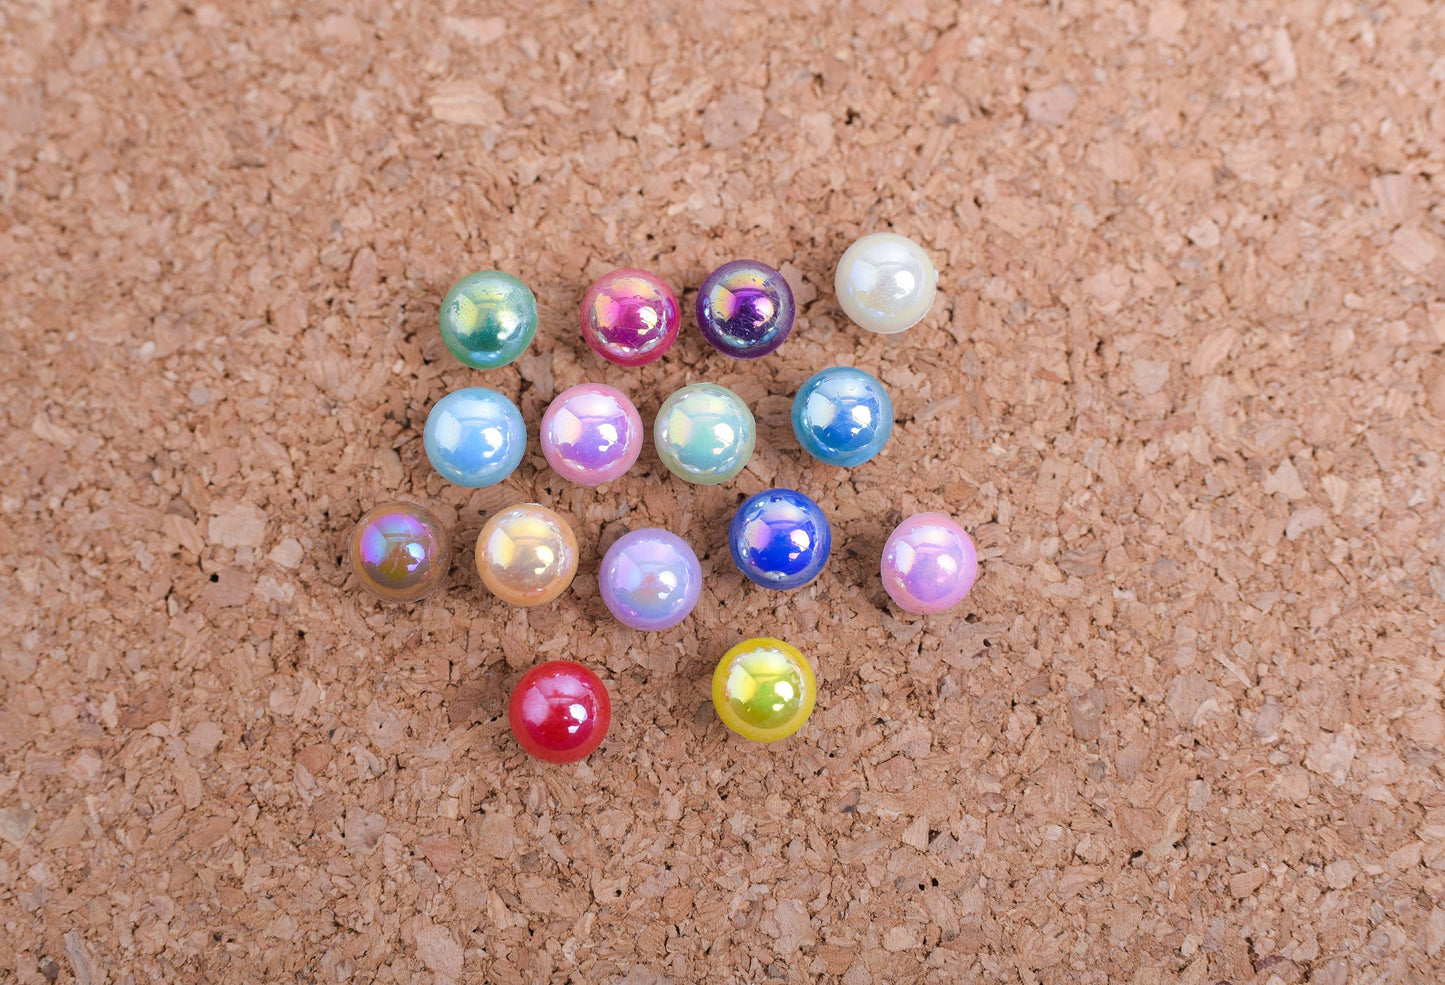 Colorful Little Pearl Push Pins- Set of 15